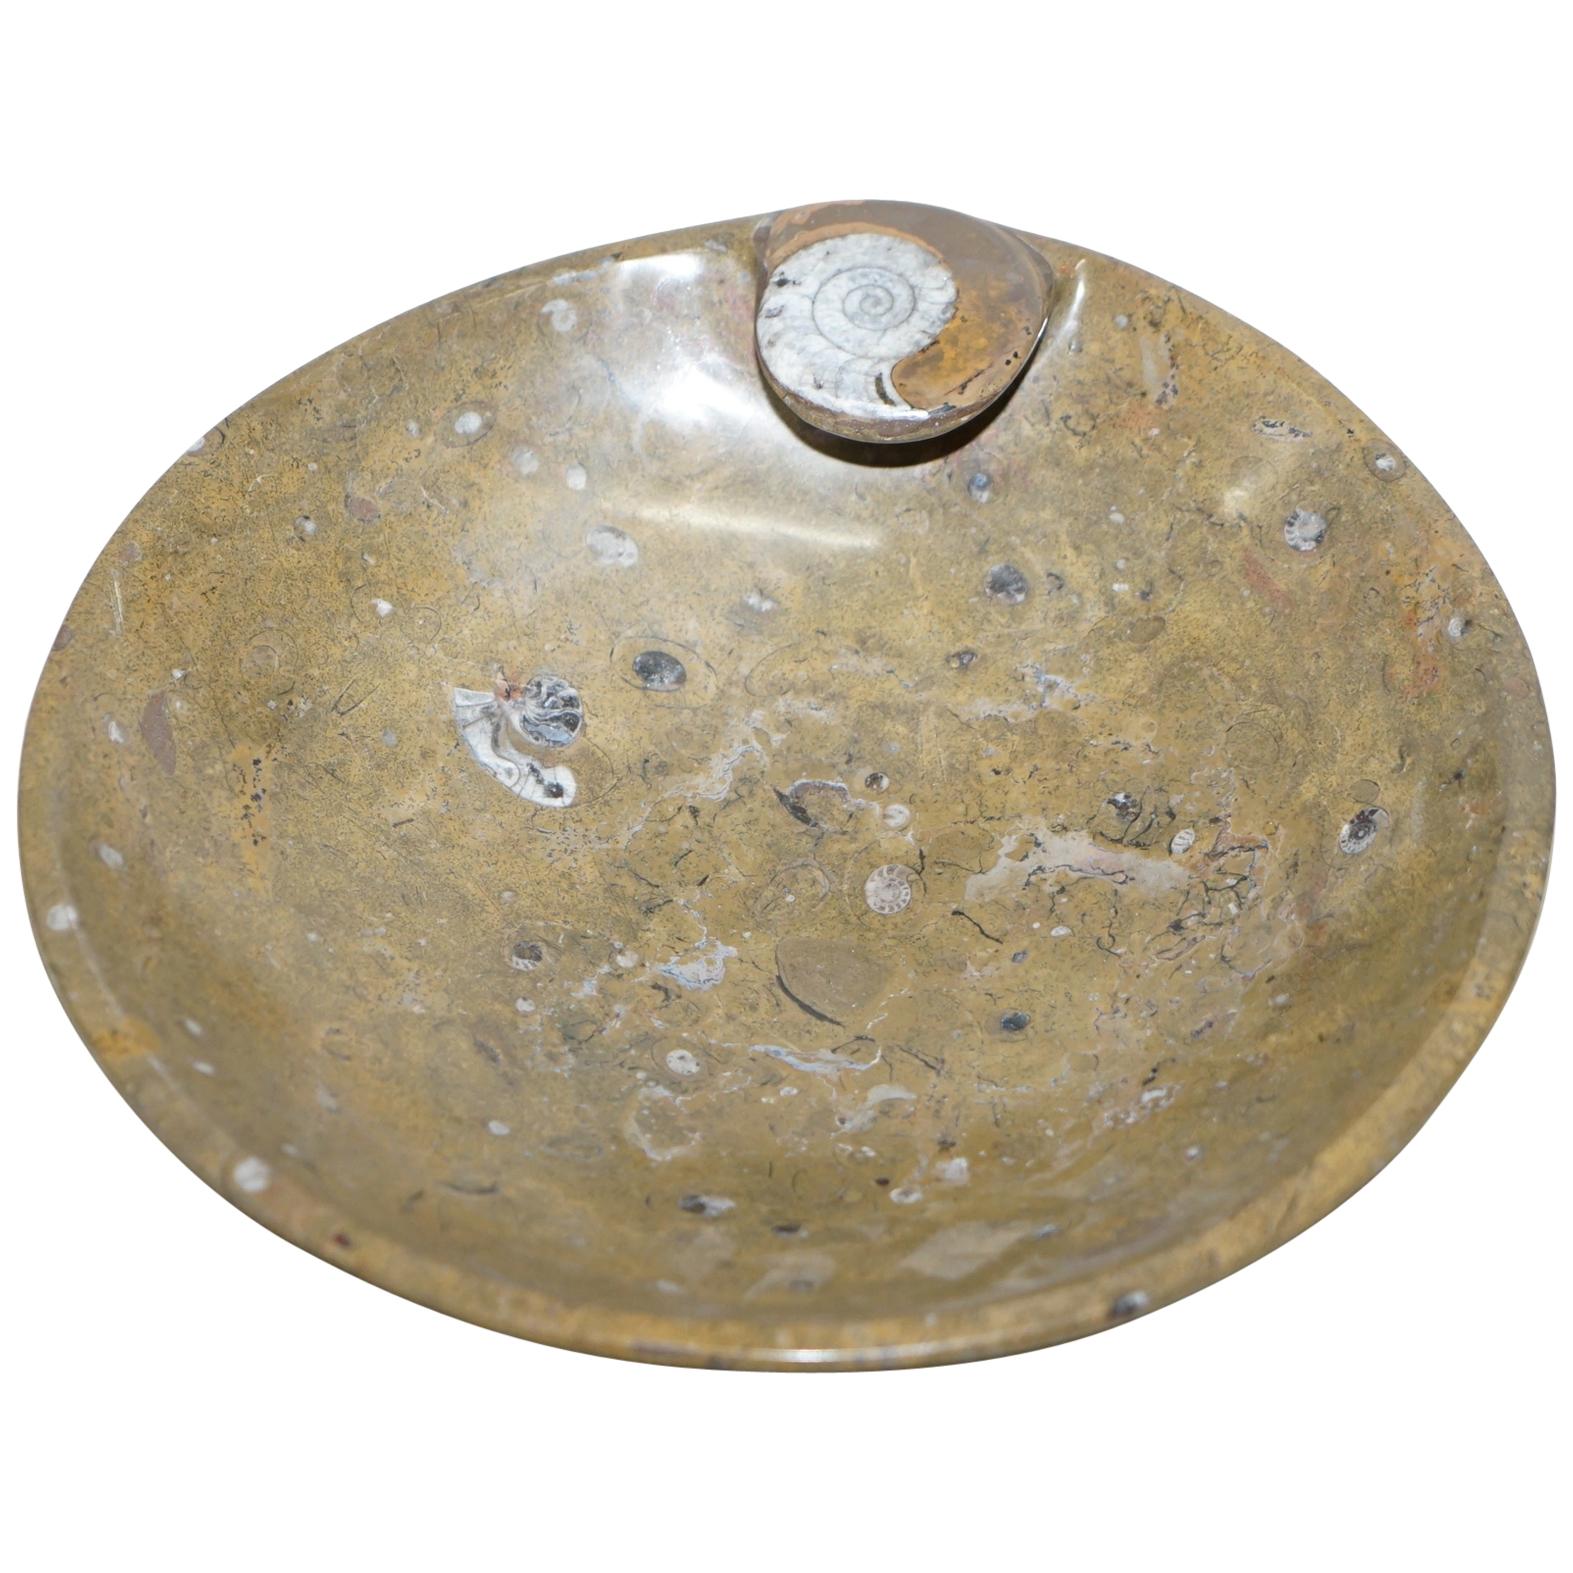 1 of 4 Decorative Moroccan Ammonite Atlas Mountains Fossil Bowls Marble Finish For Sale